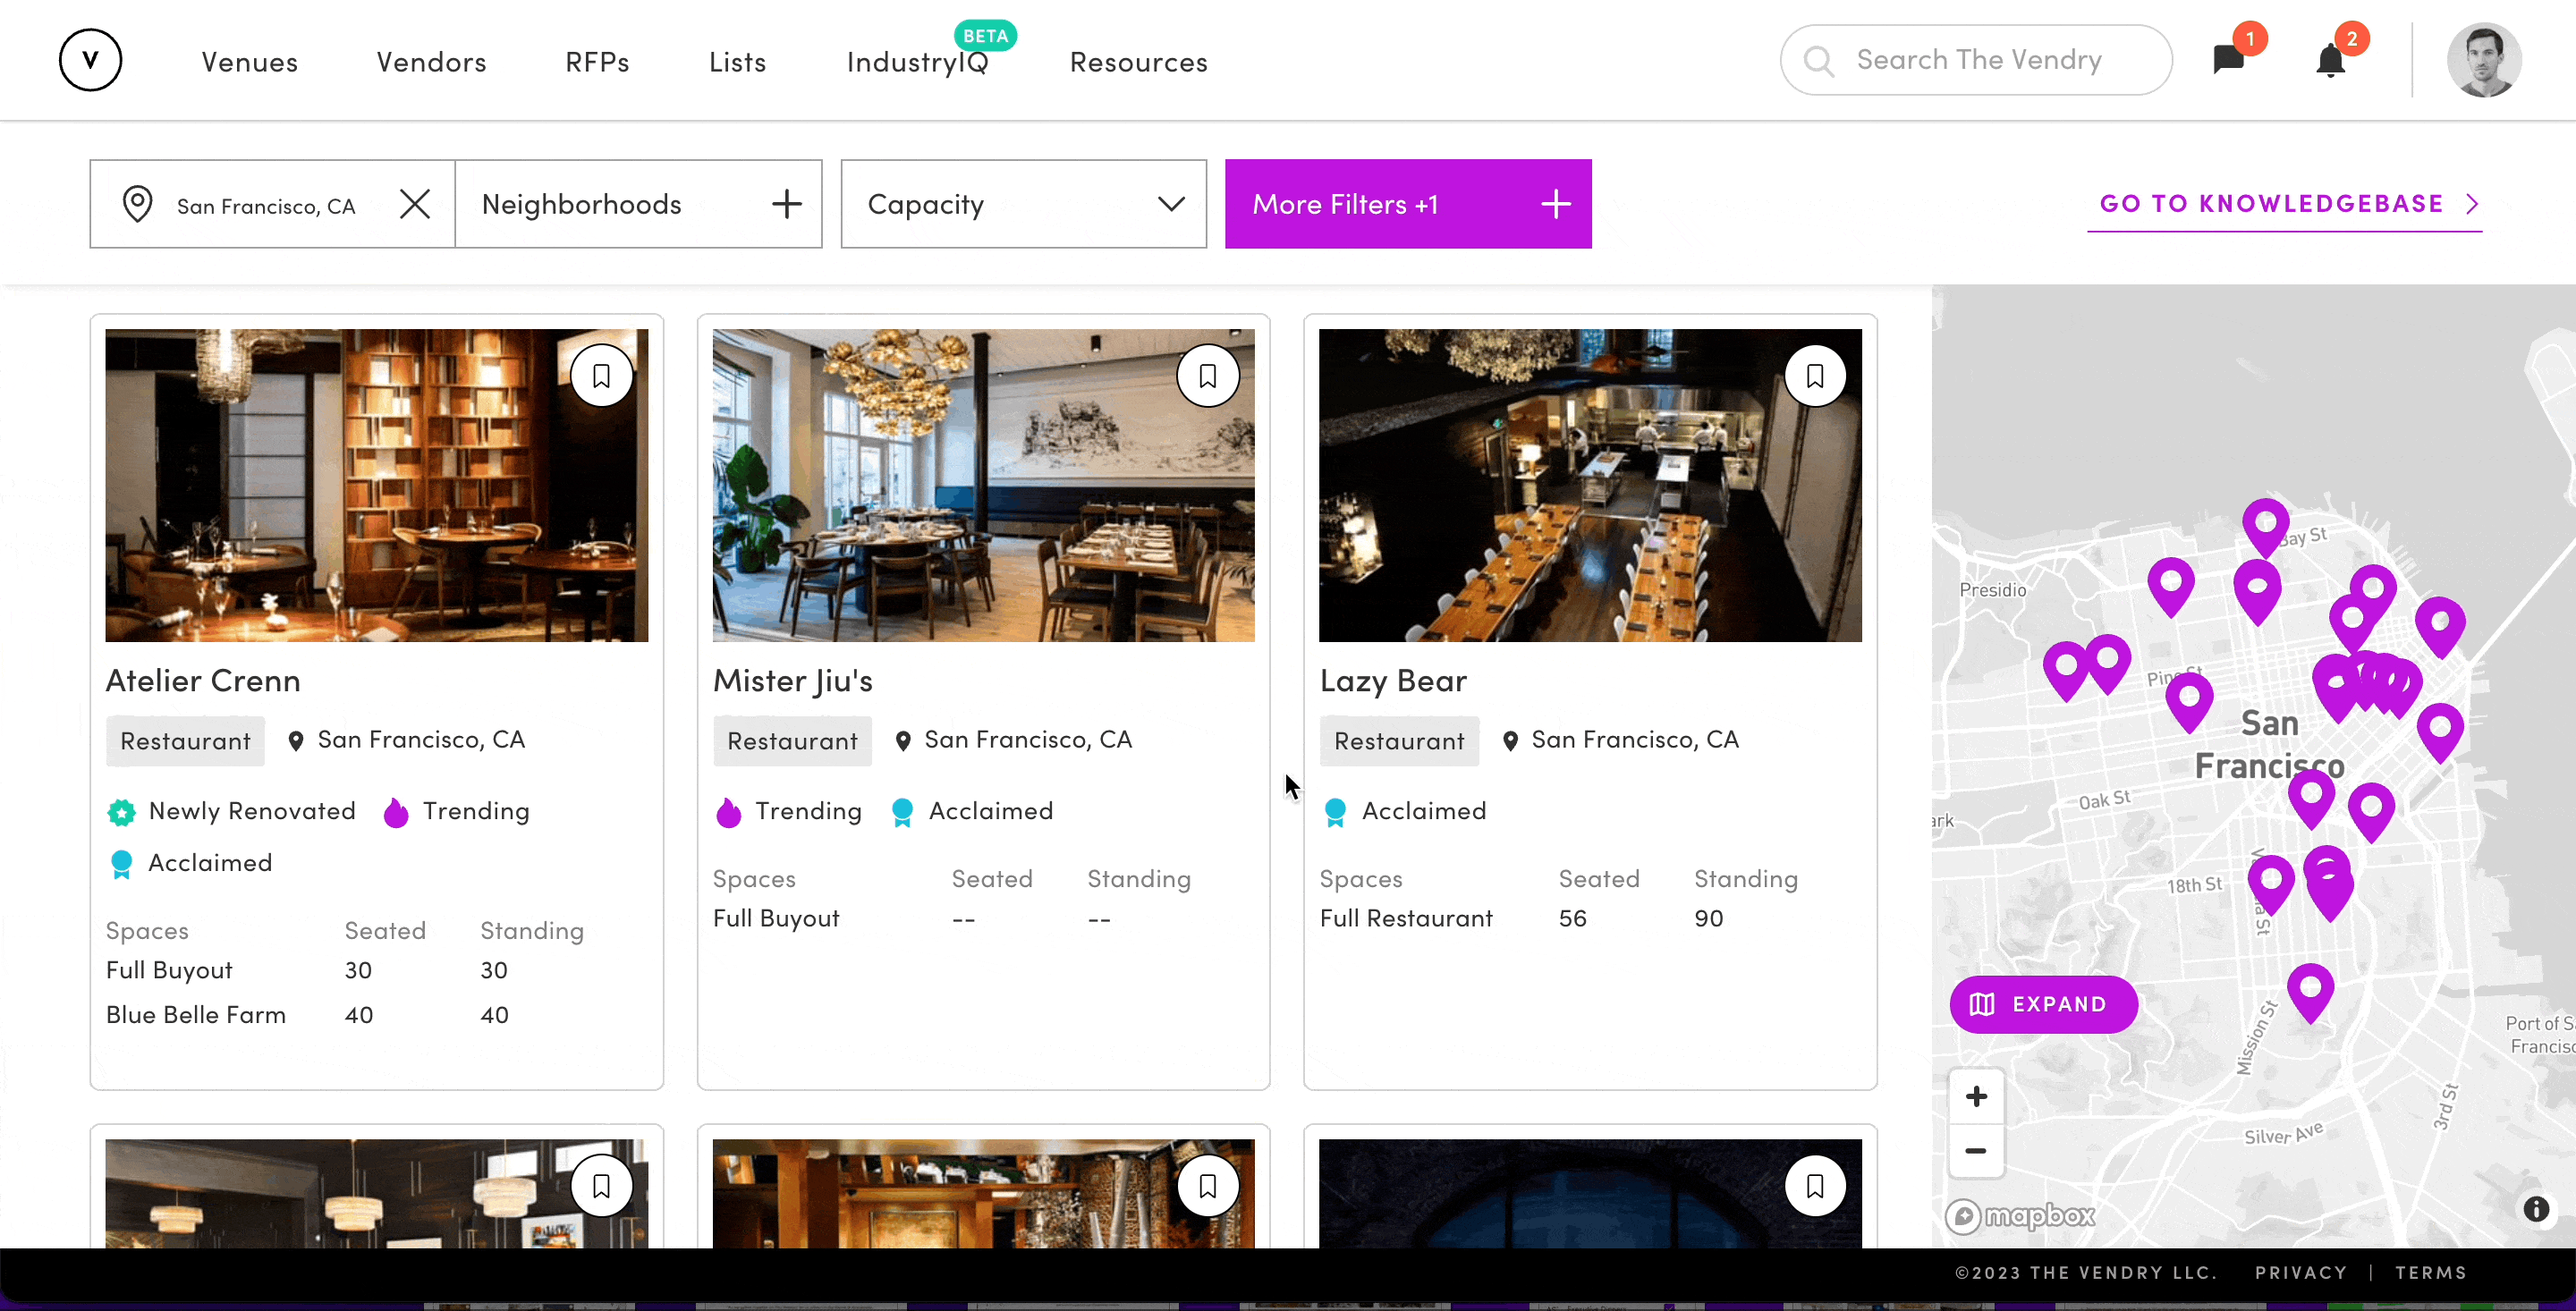 Gif of venue search to see venues with Acclaimed Badges